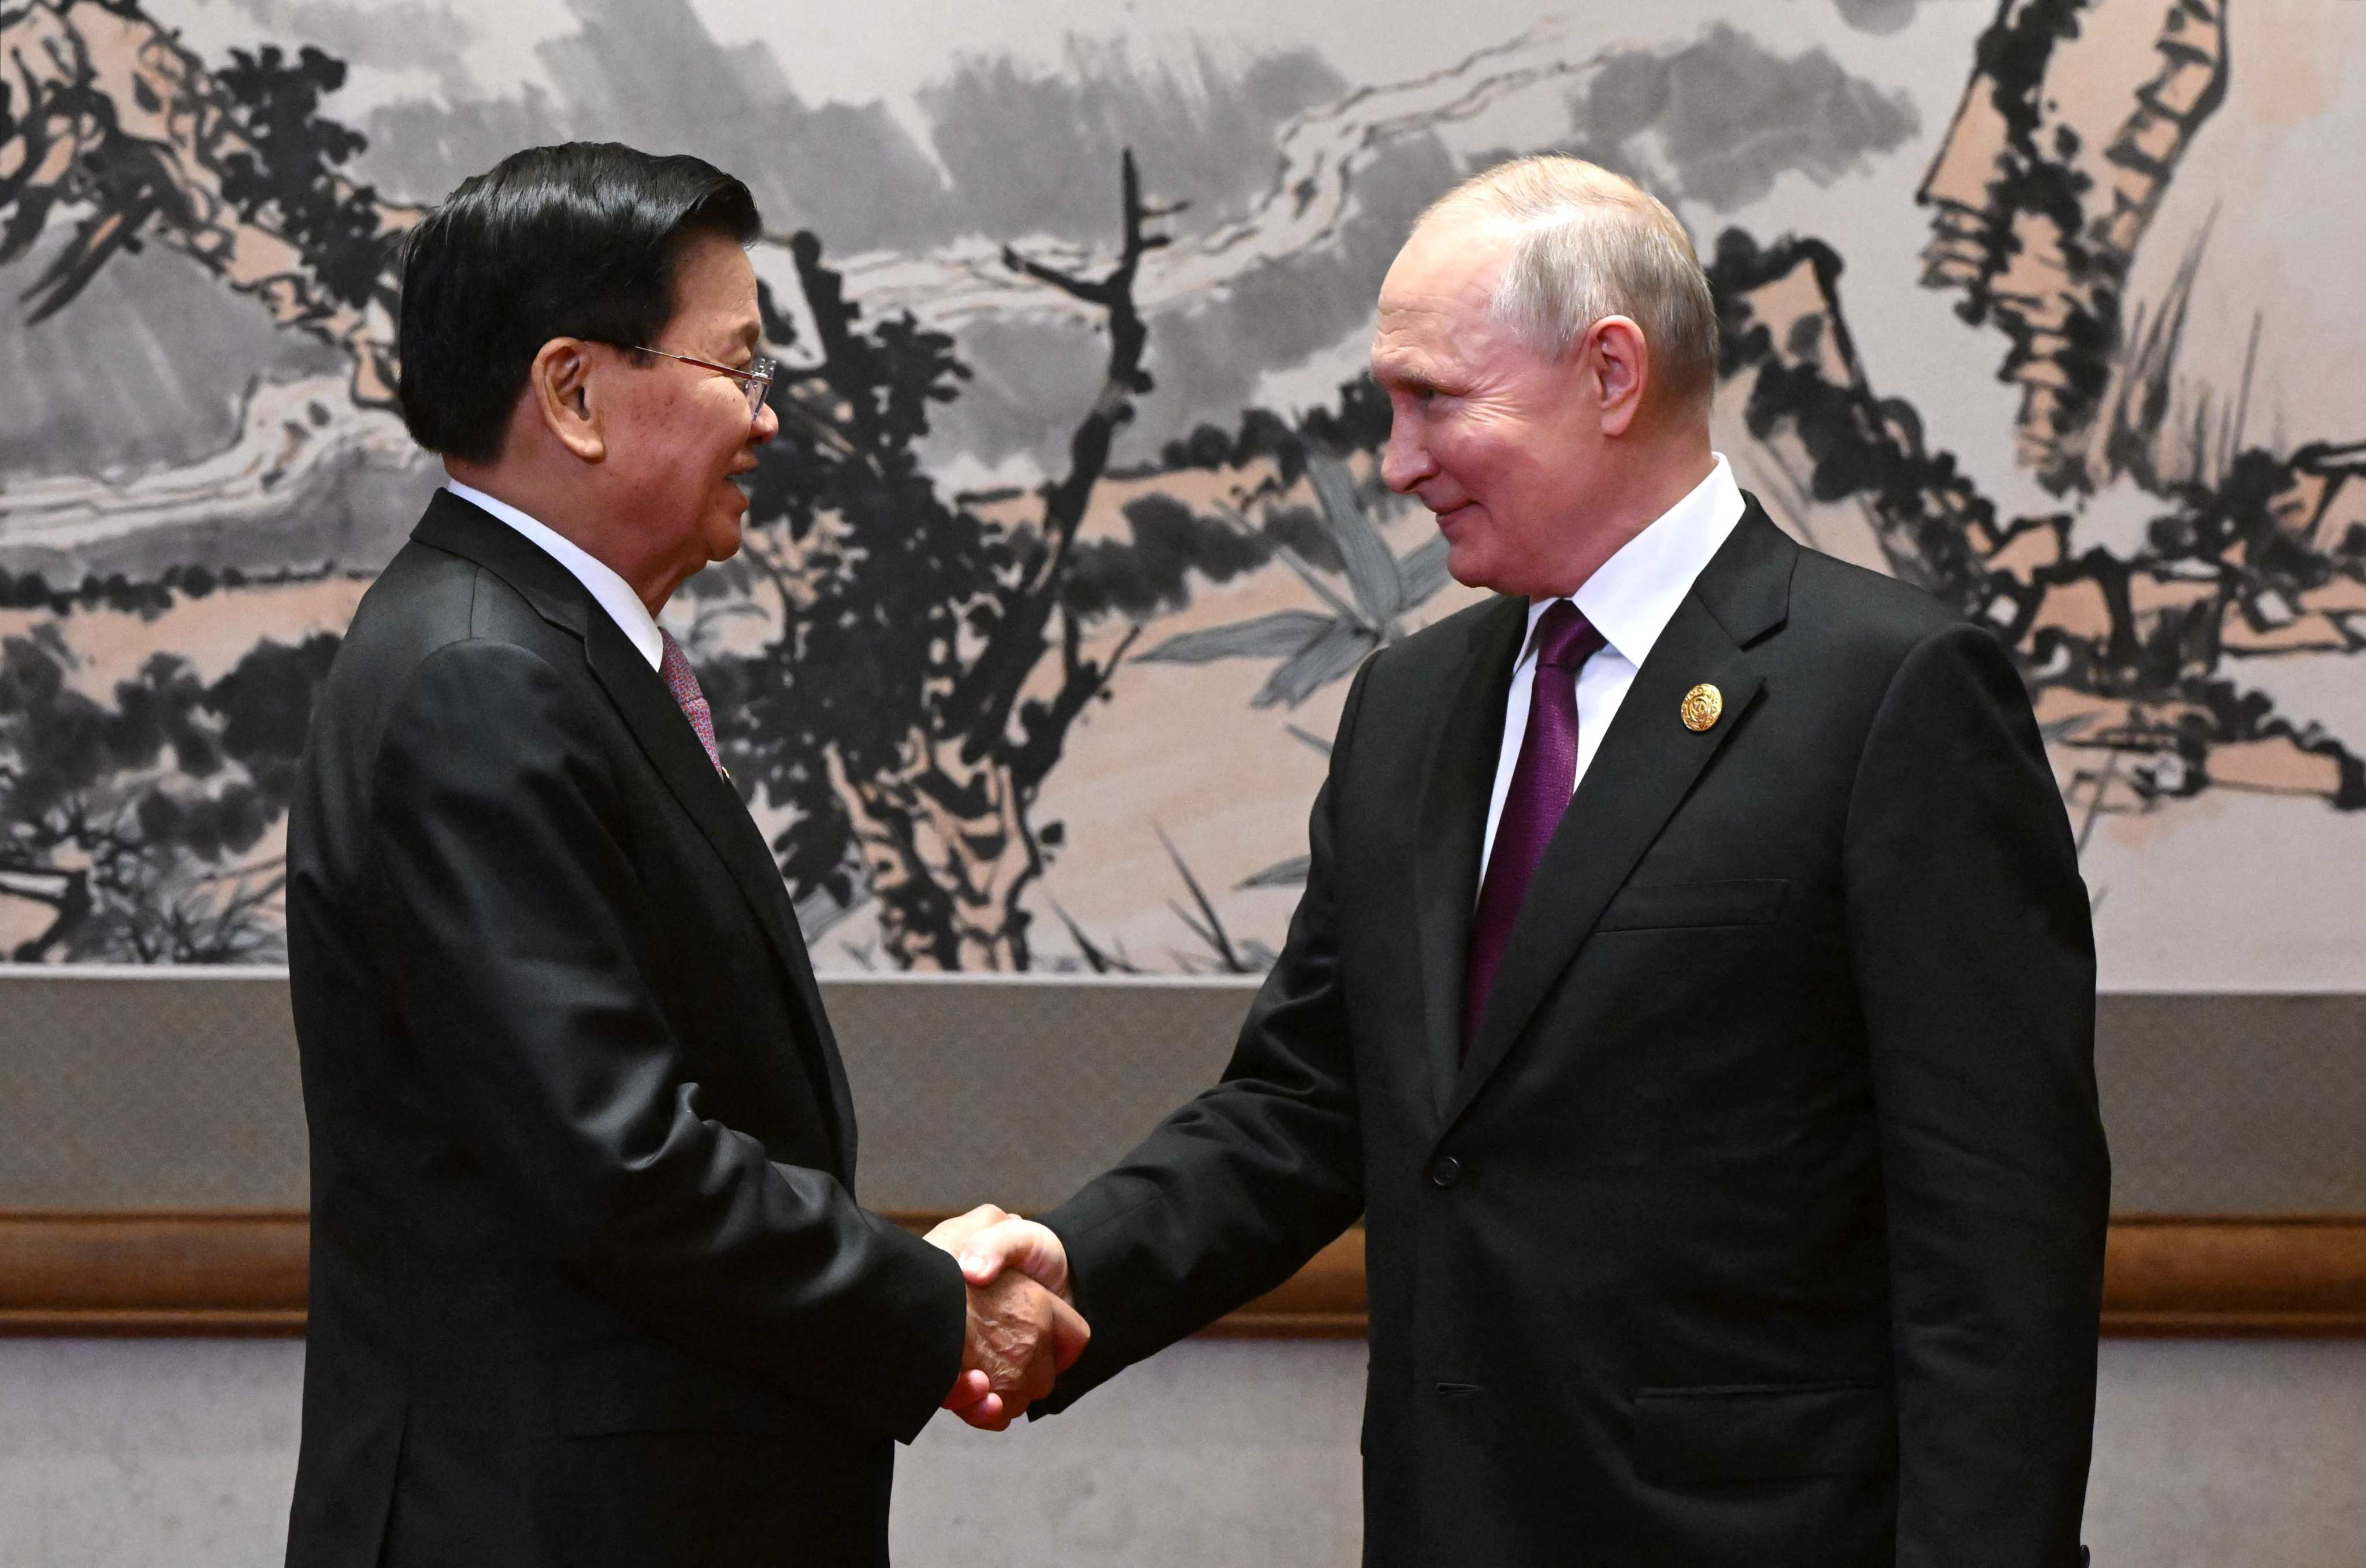 Russia’s President Vladimir Putin meets his Lao counterpart Thongloun Sisoulith on the sidelines of the Third Belt and Road Forum in Beijing on October 17. Photo: AFP